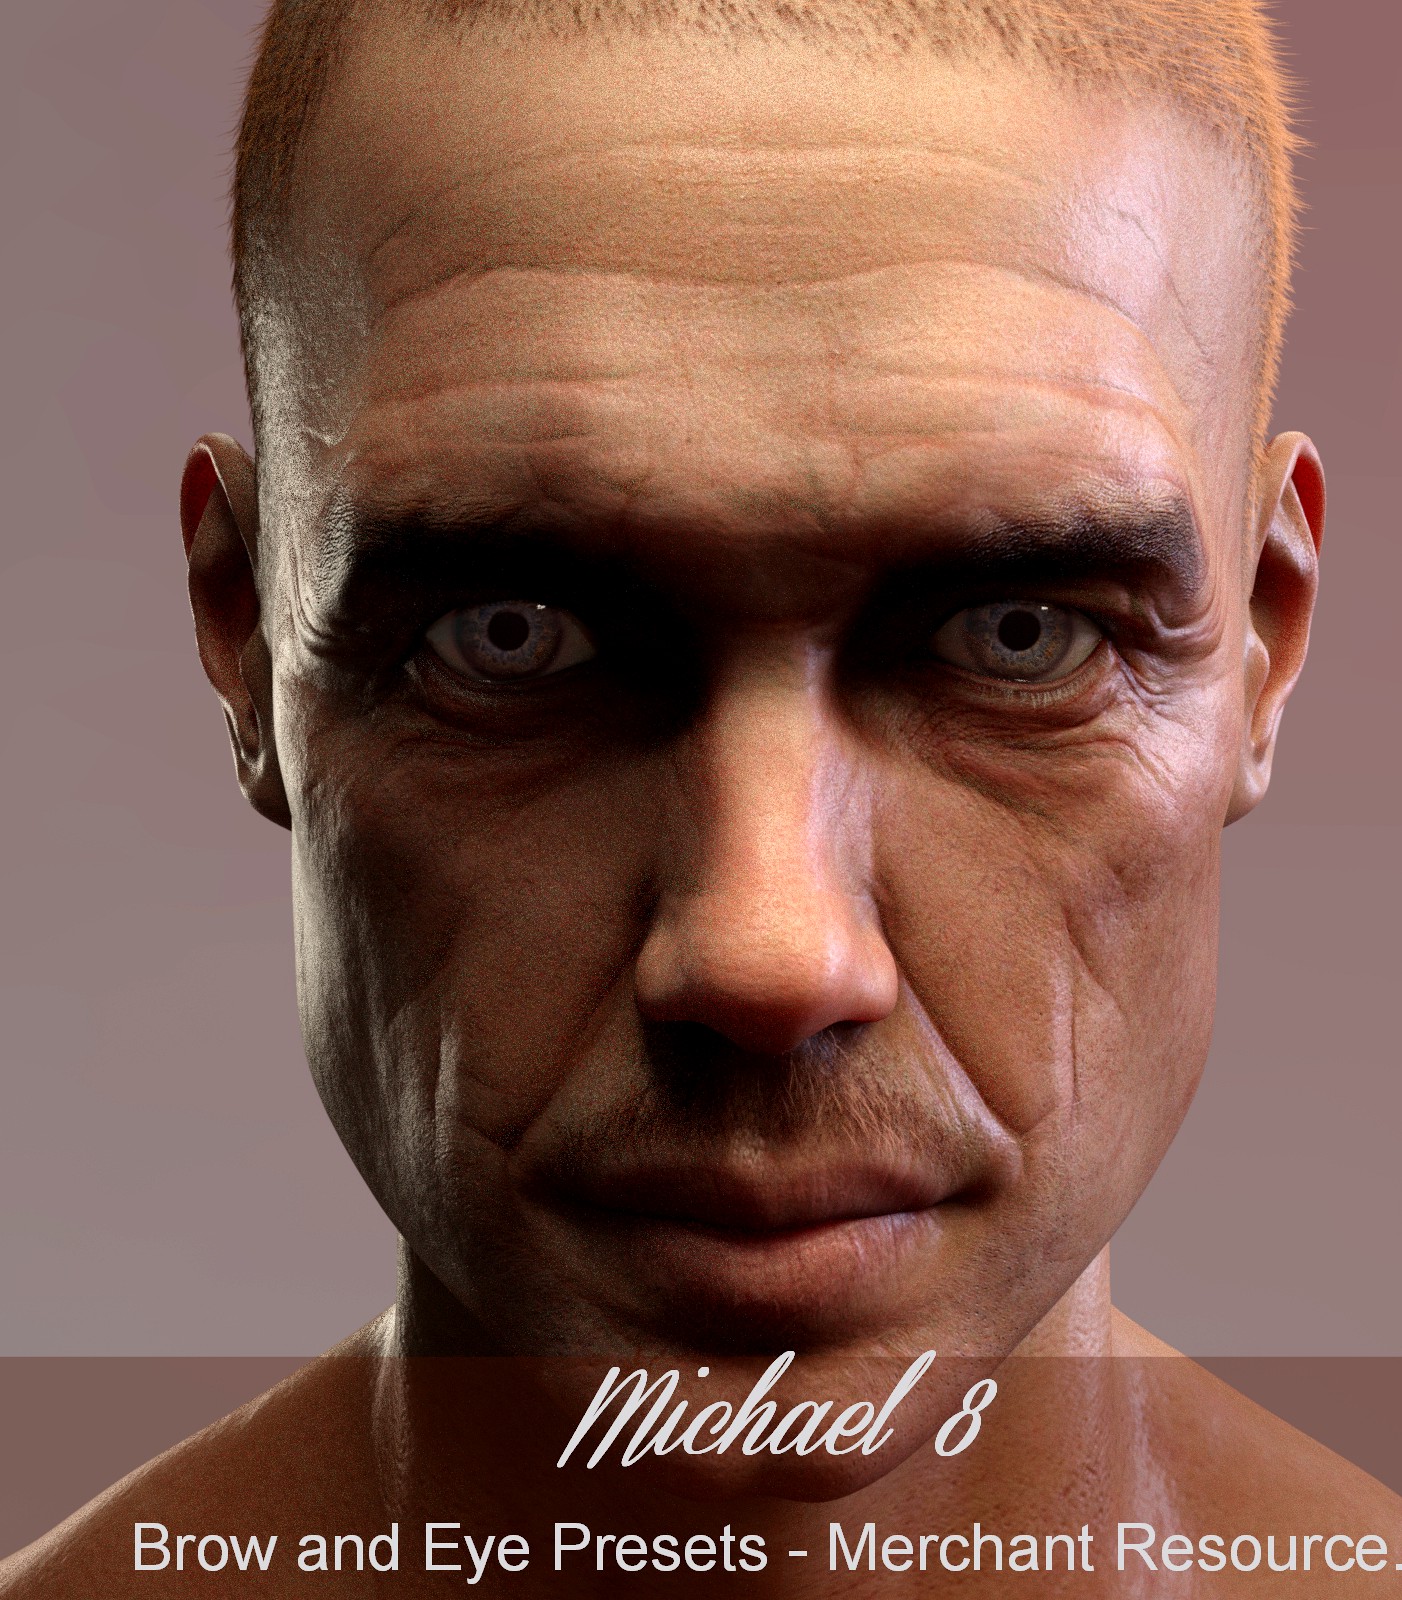 Brow and Eye Presets for Michael 8 - Merchant Resource